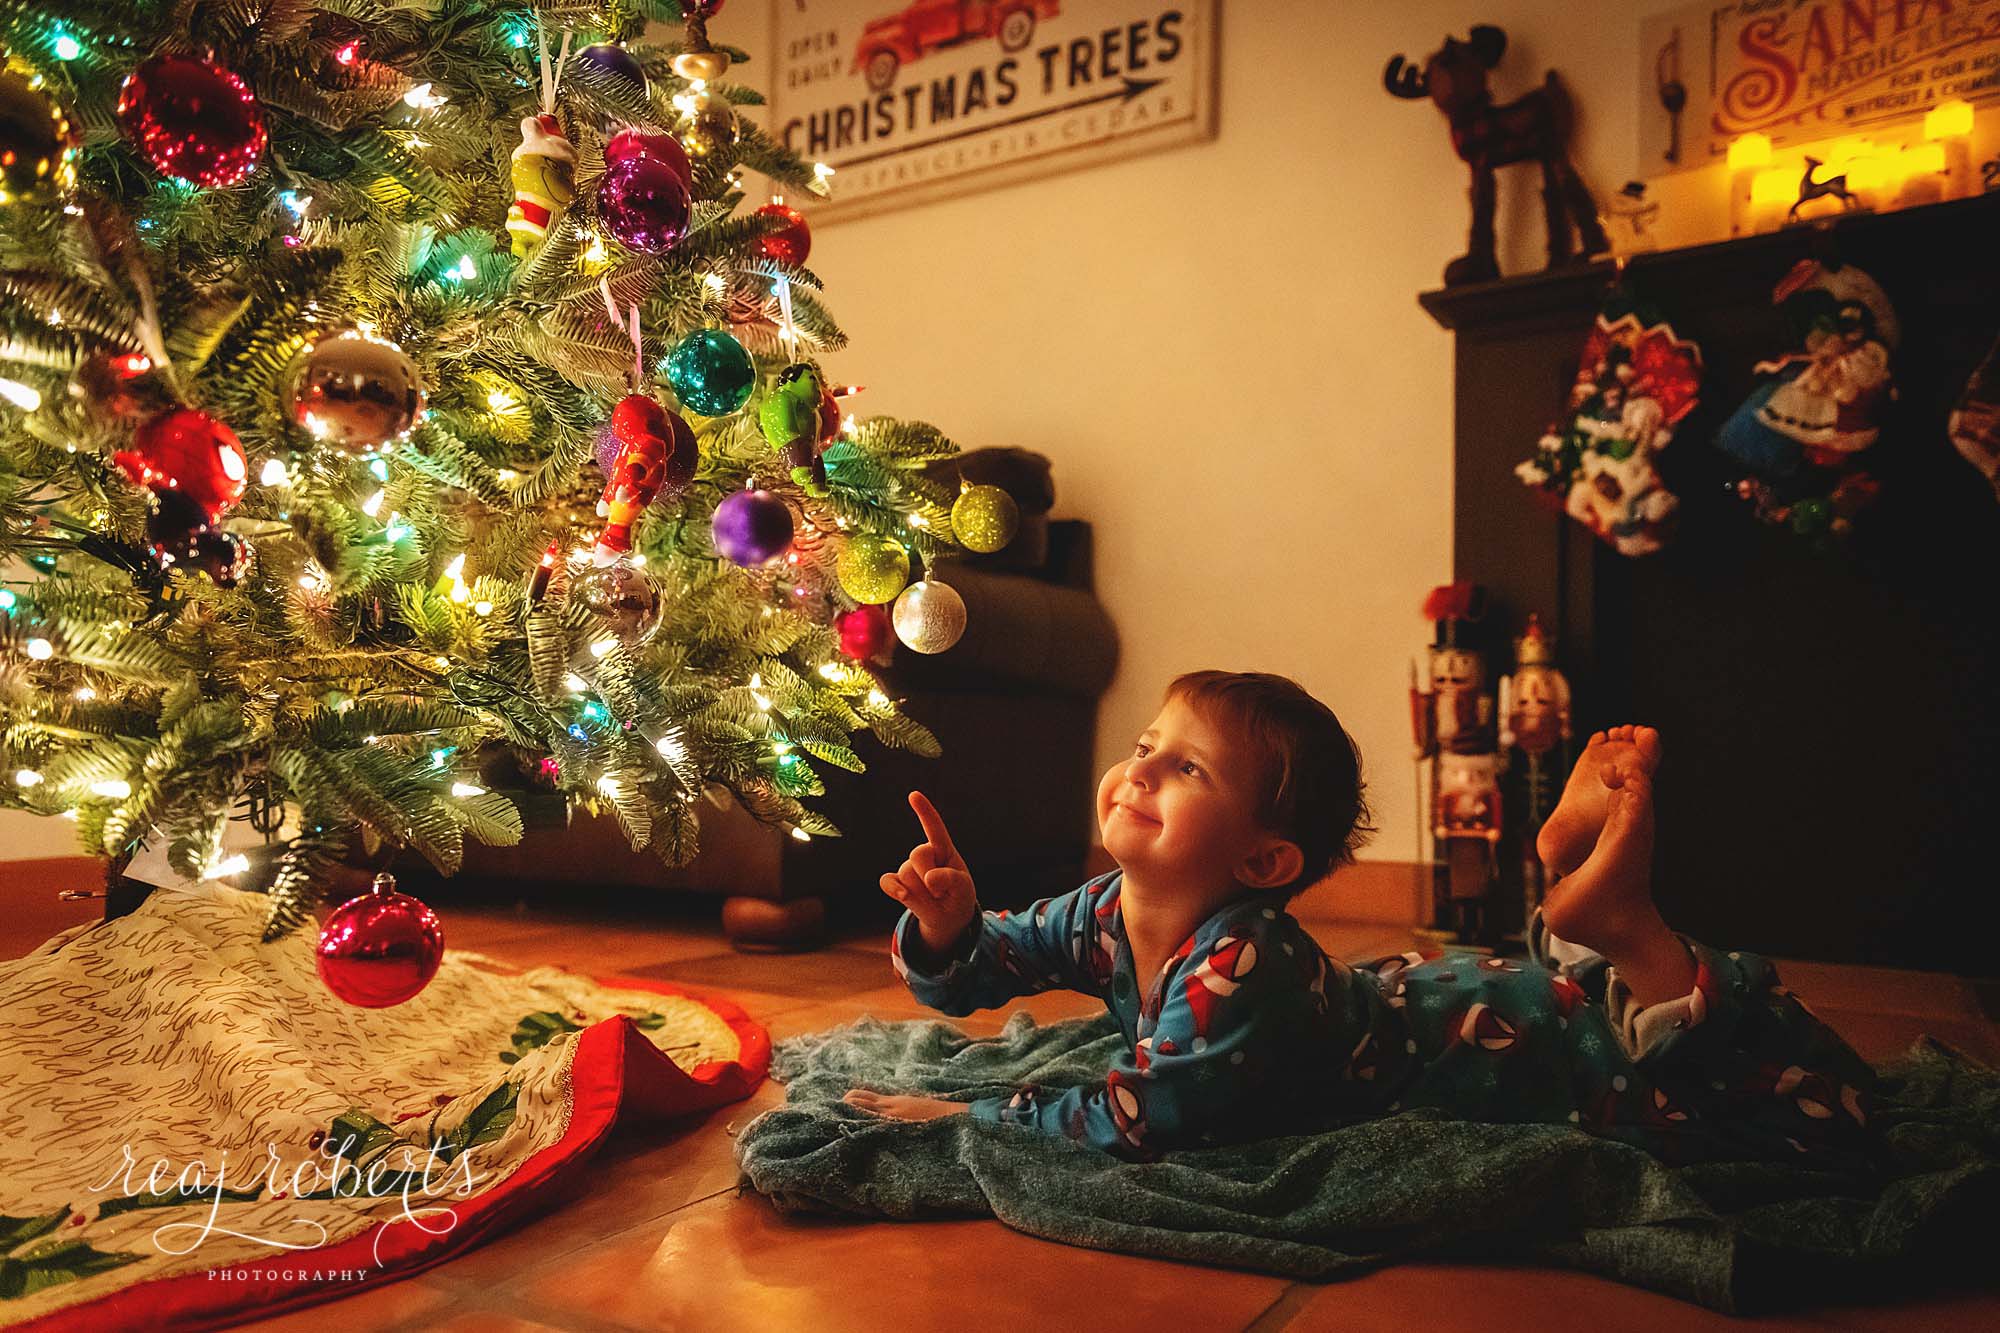 In-home Christmas tree lights photos Christmas tree photos | Simply Sparkle Sessions by Reaj Roberts Photography